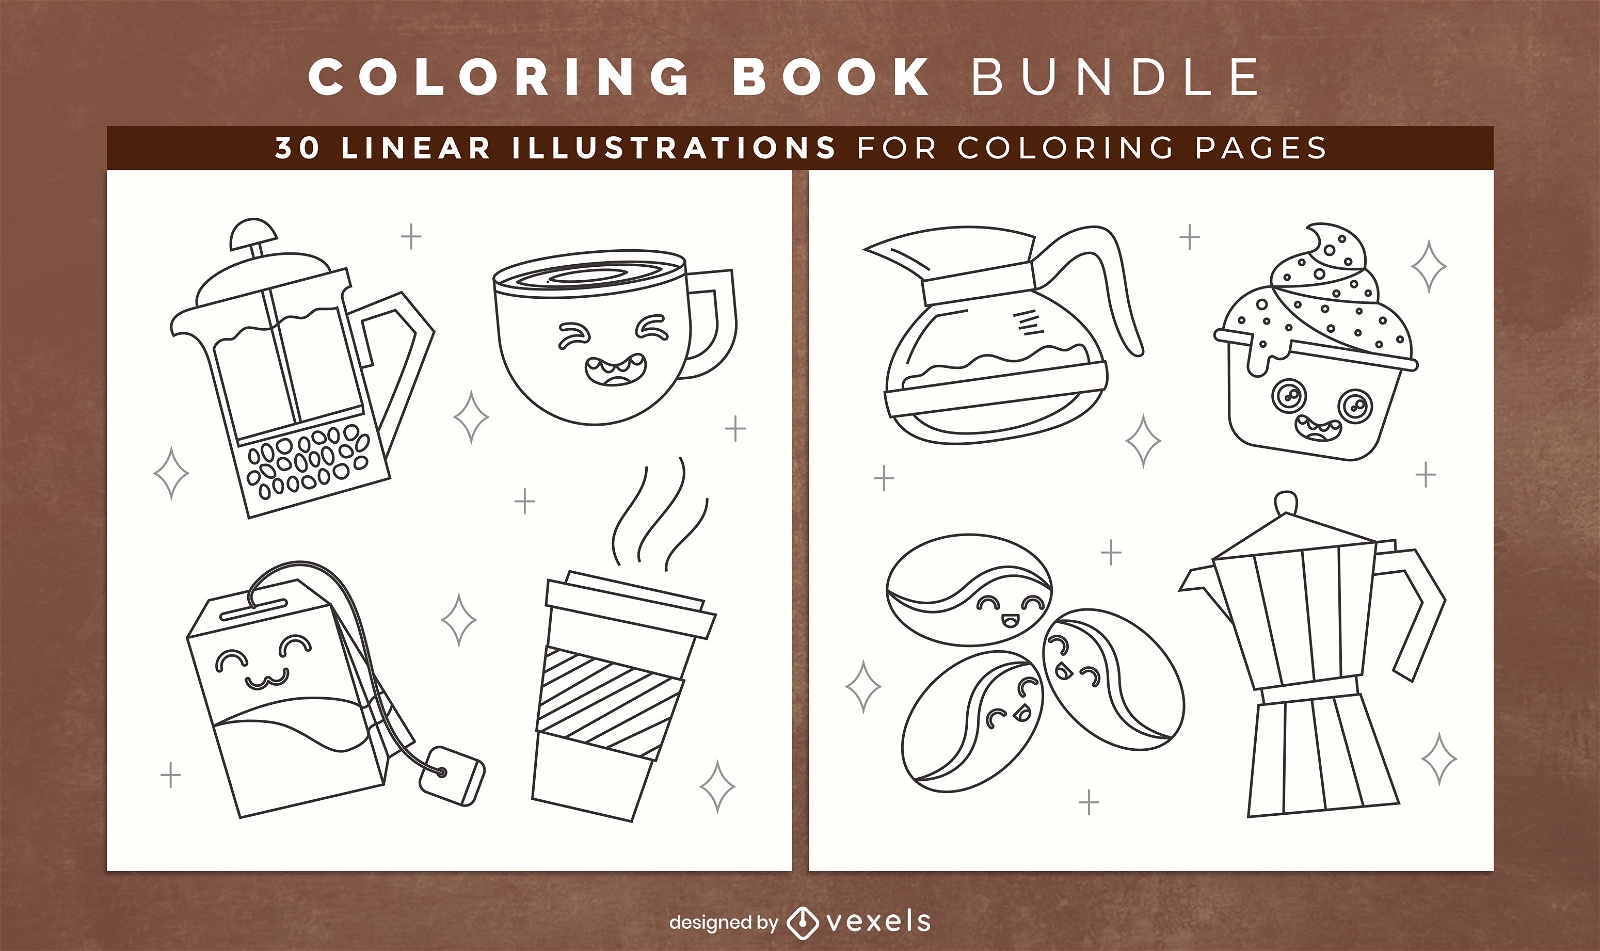 Hot drinks coloring book design pages